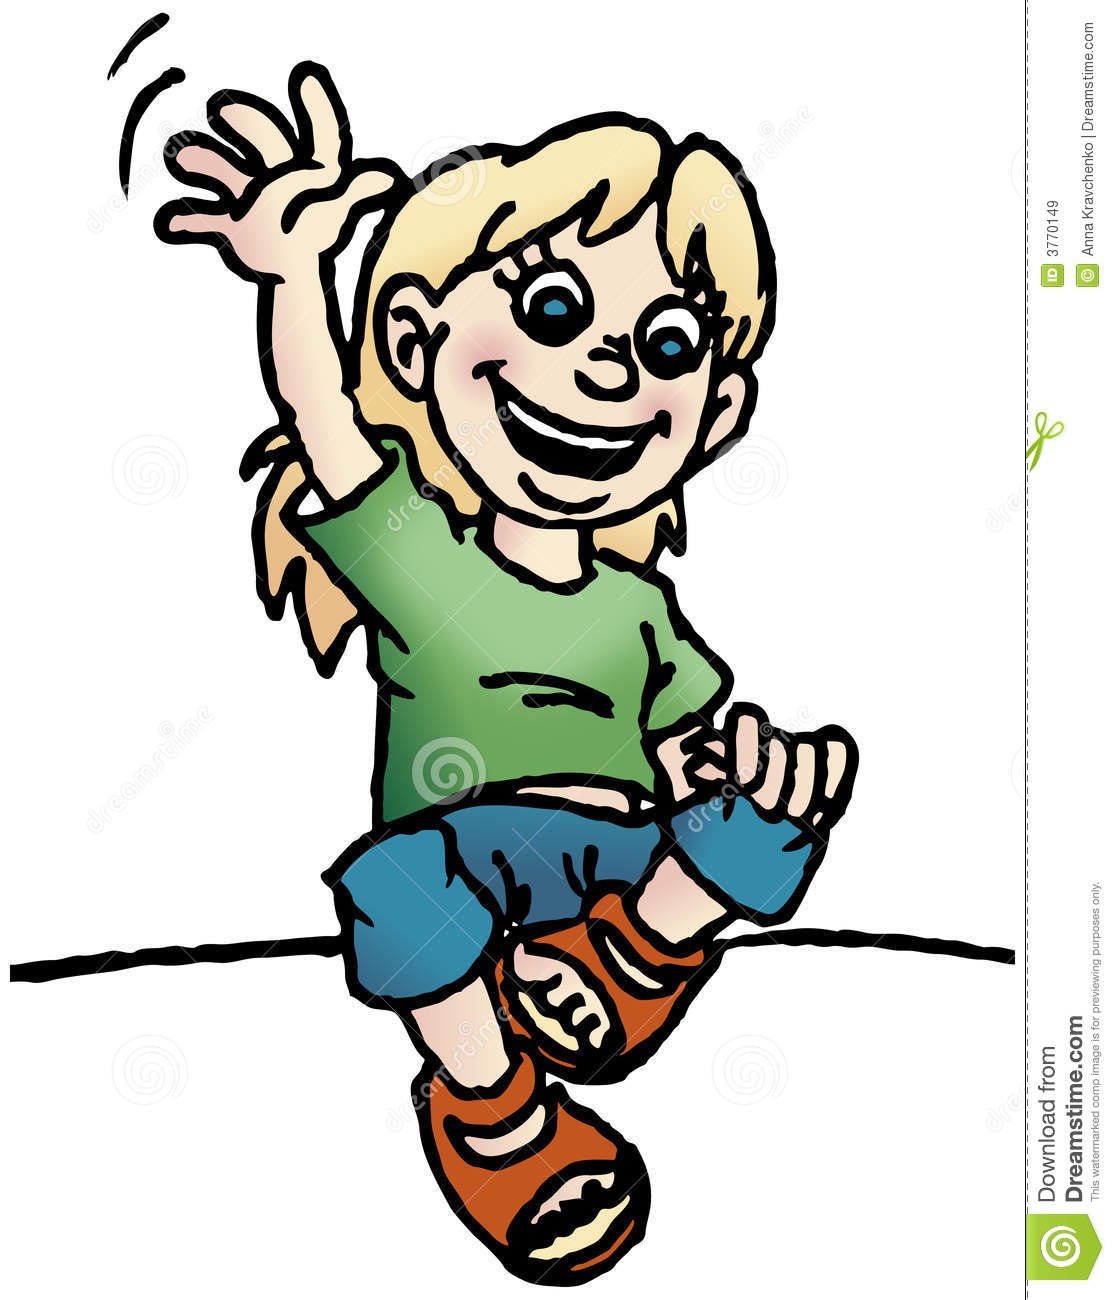 Girl Waving A Hand Royalty Free Stock Images   Image  3770149